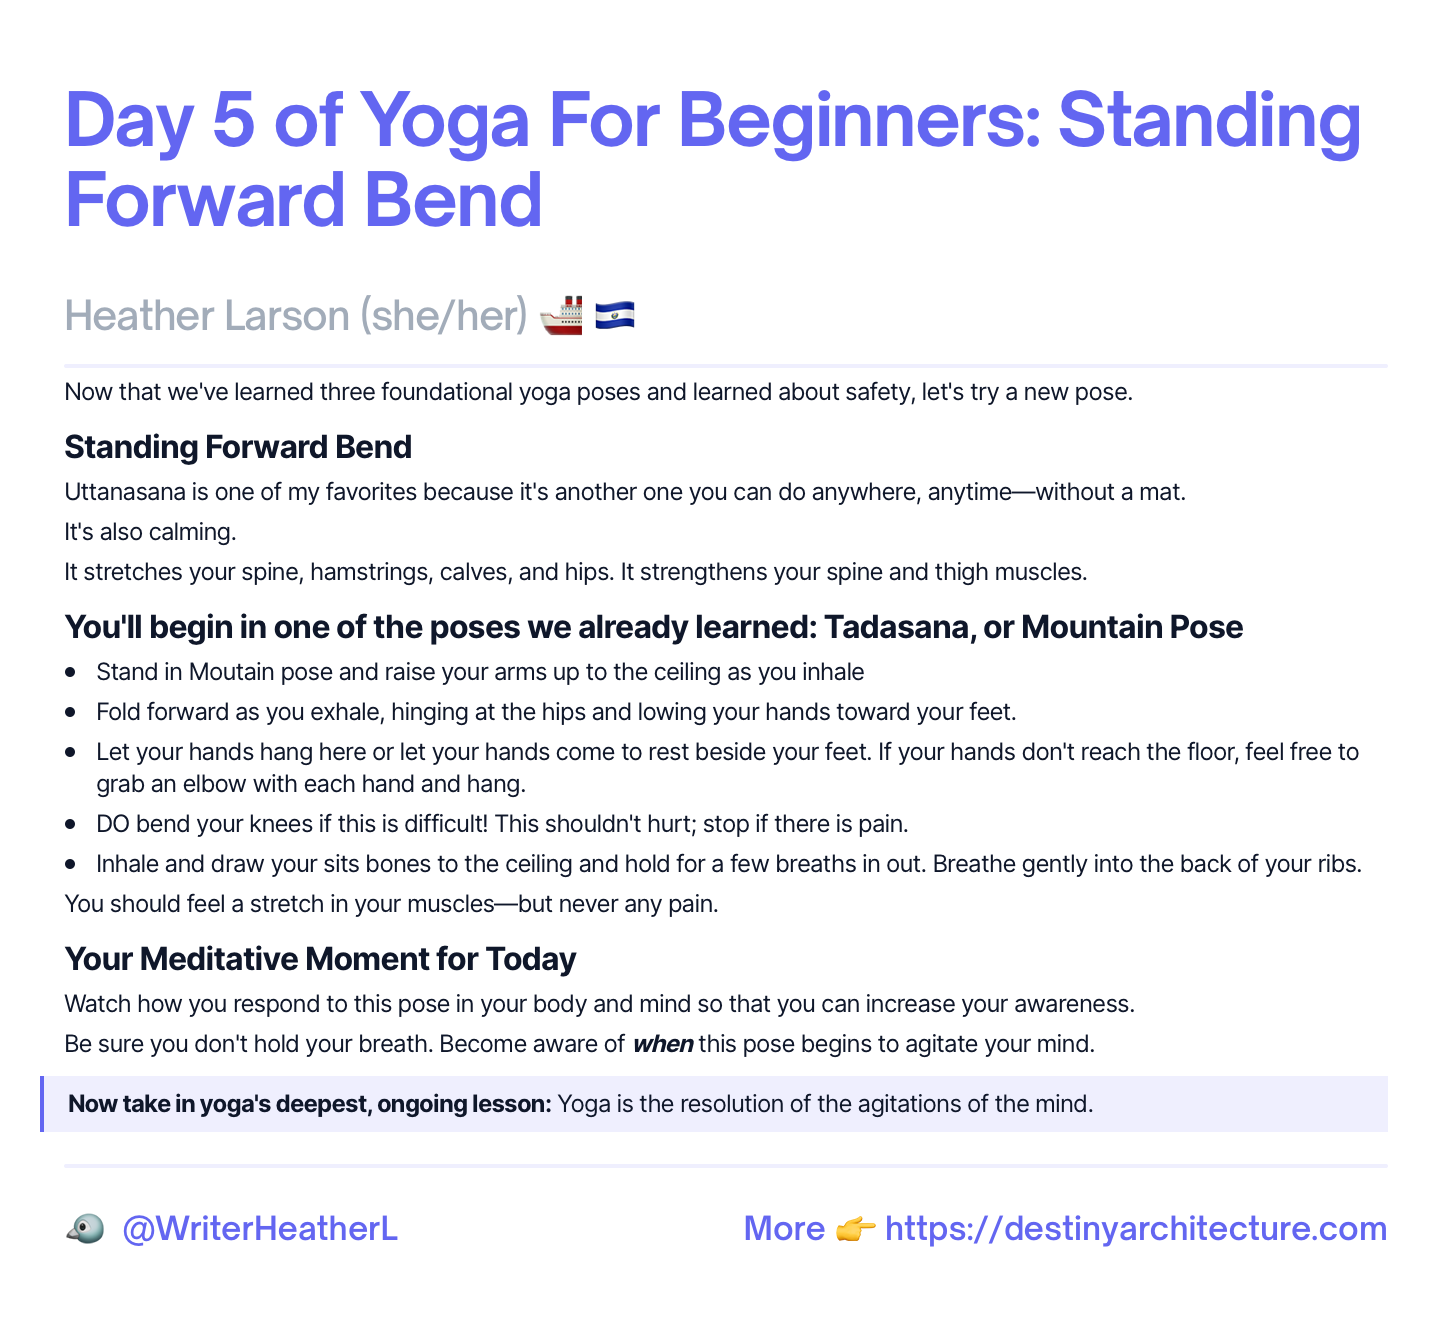 Day 5/30 of Yoga for Beginners: How to do a Standing Forward Bend